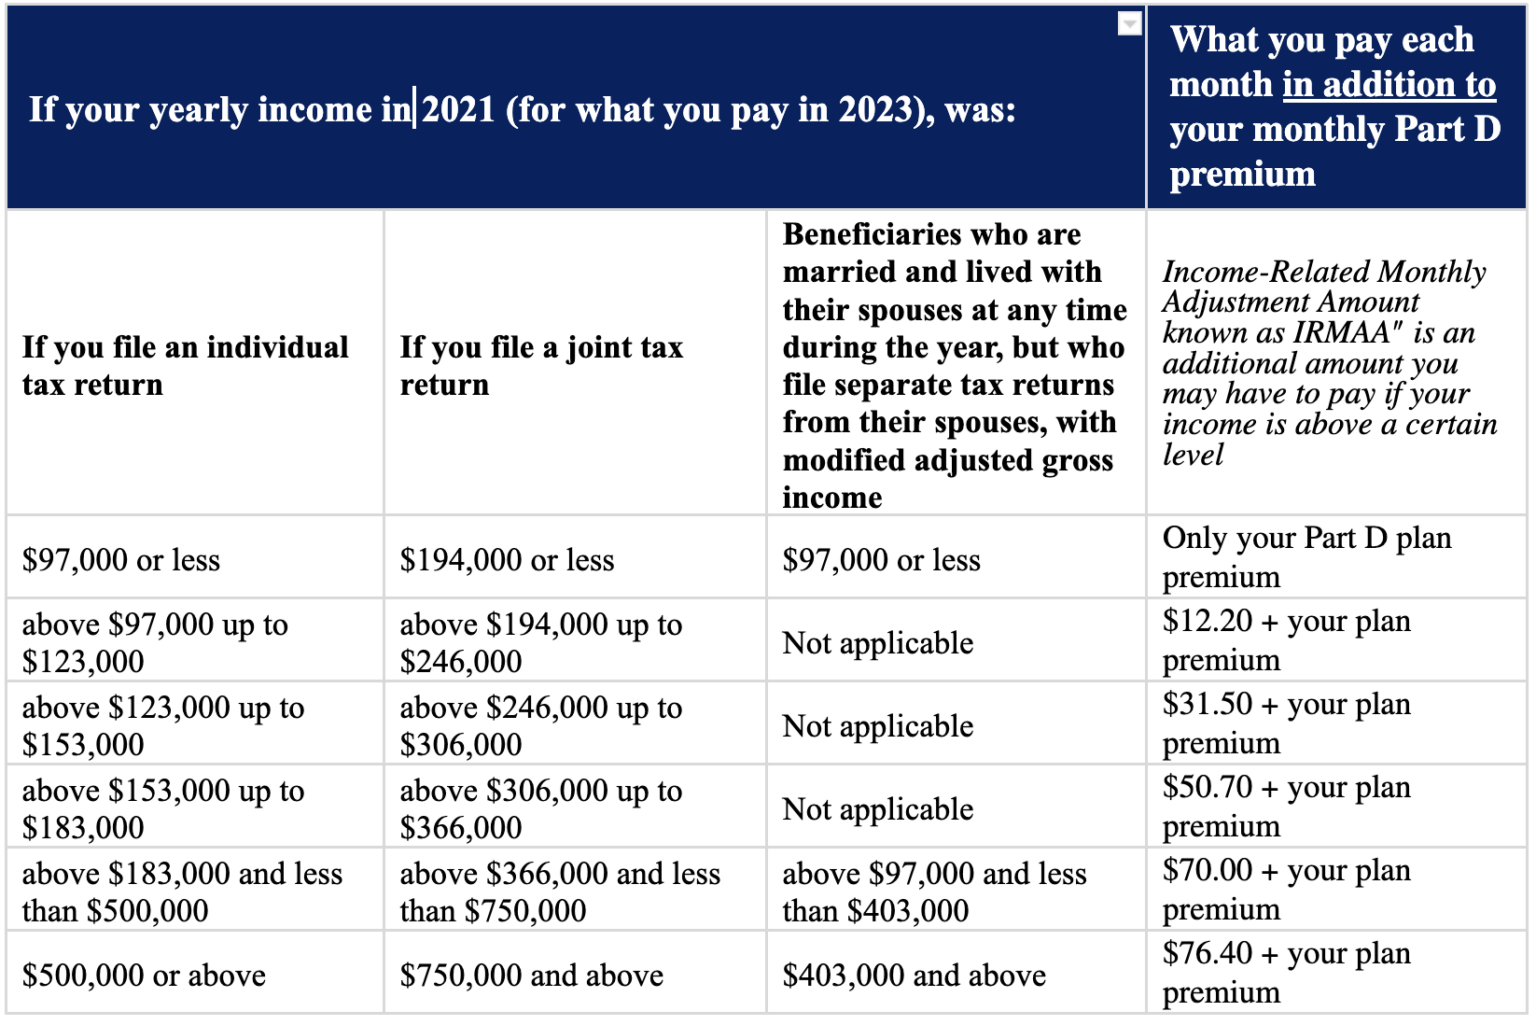 Medicare Premium, Deductible, CostSharing and Other Changes for 2023